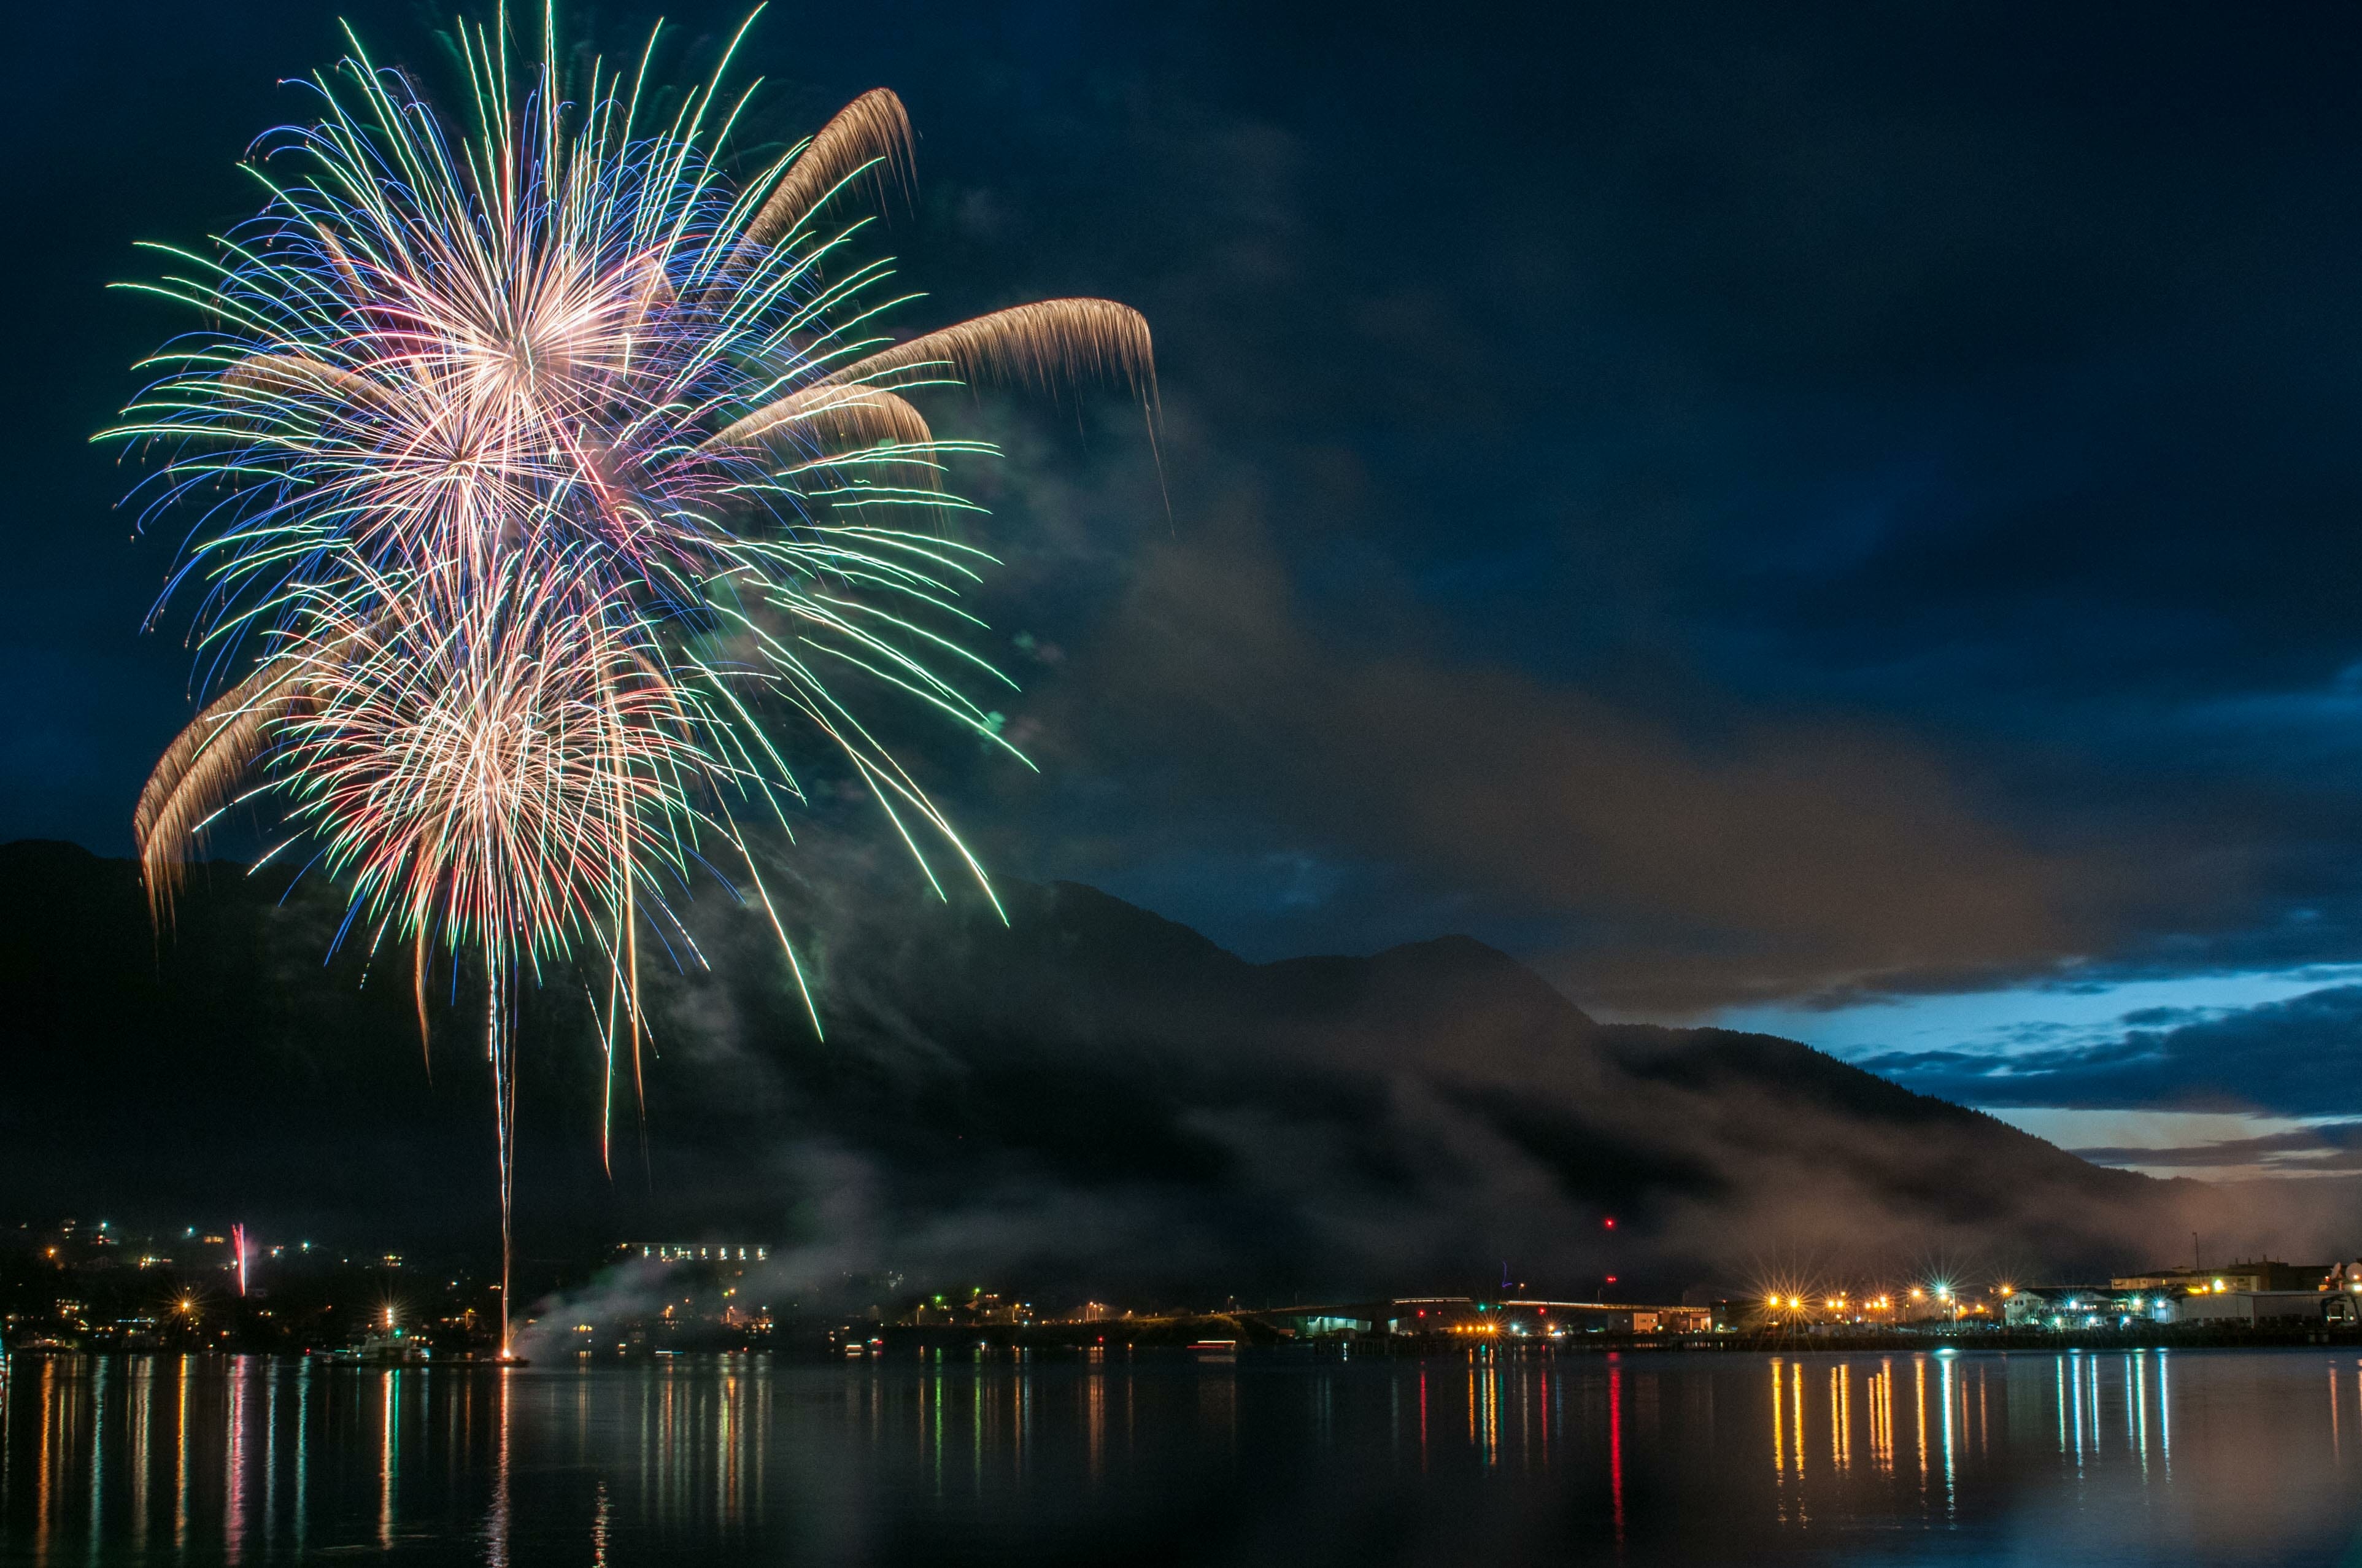 Gastineau Channel Fireworks Show Will Go On But Personal Use